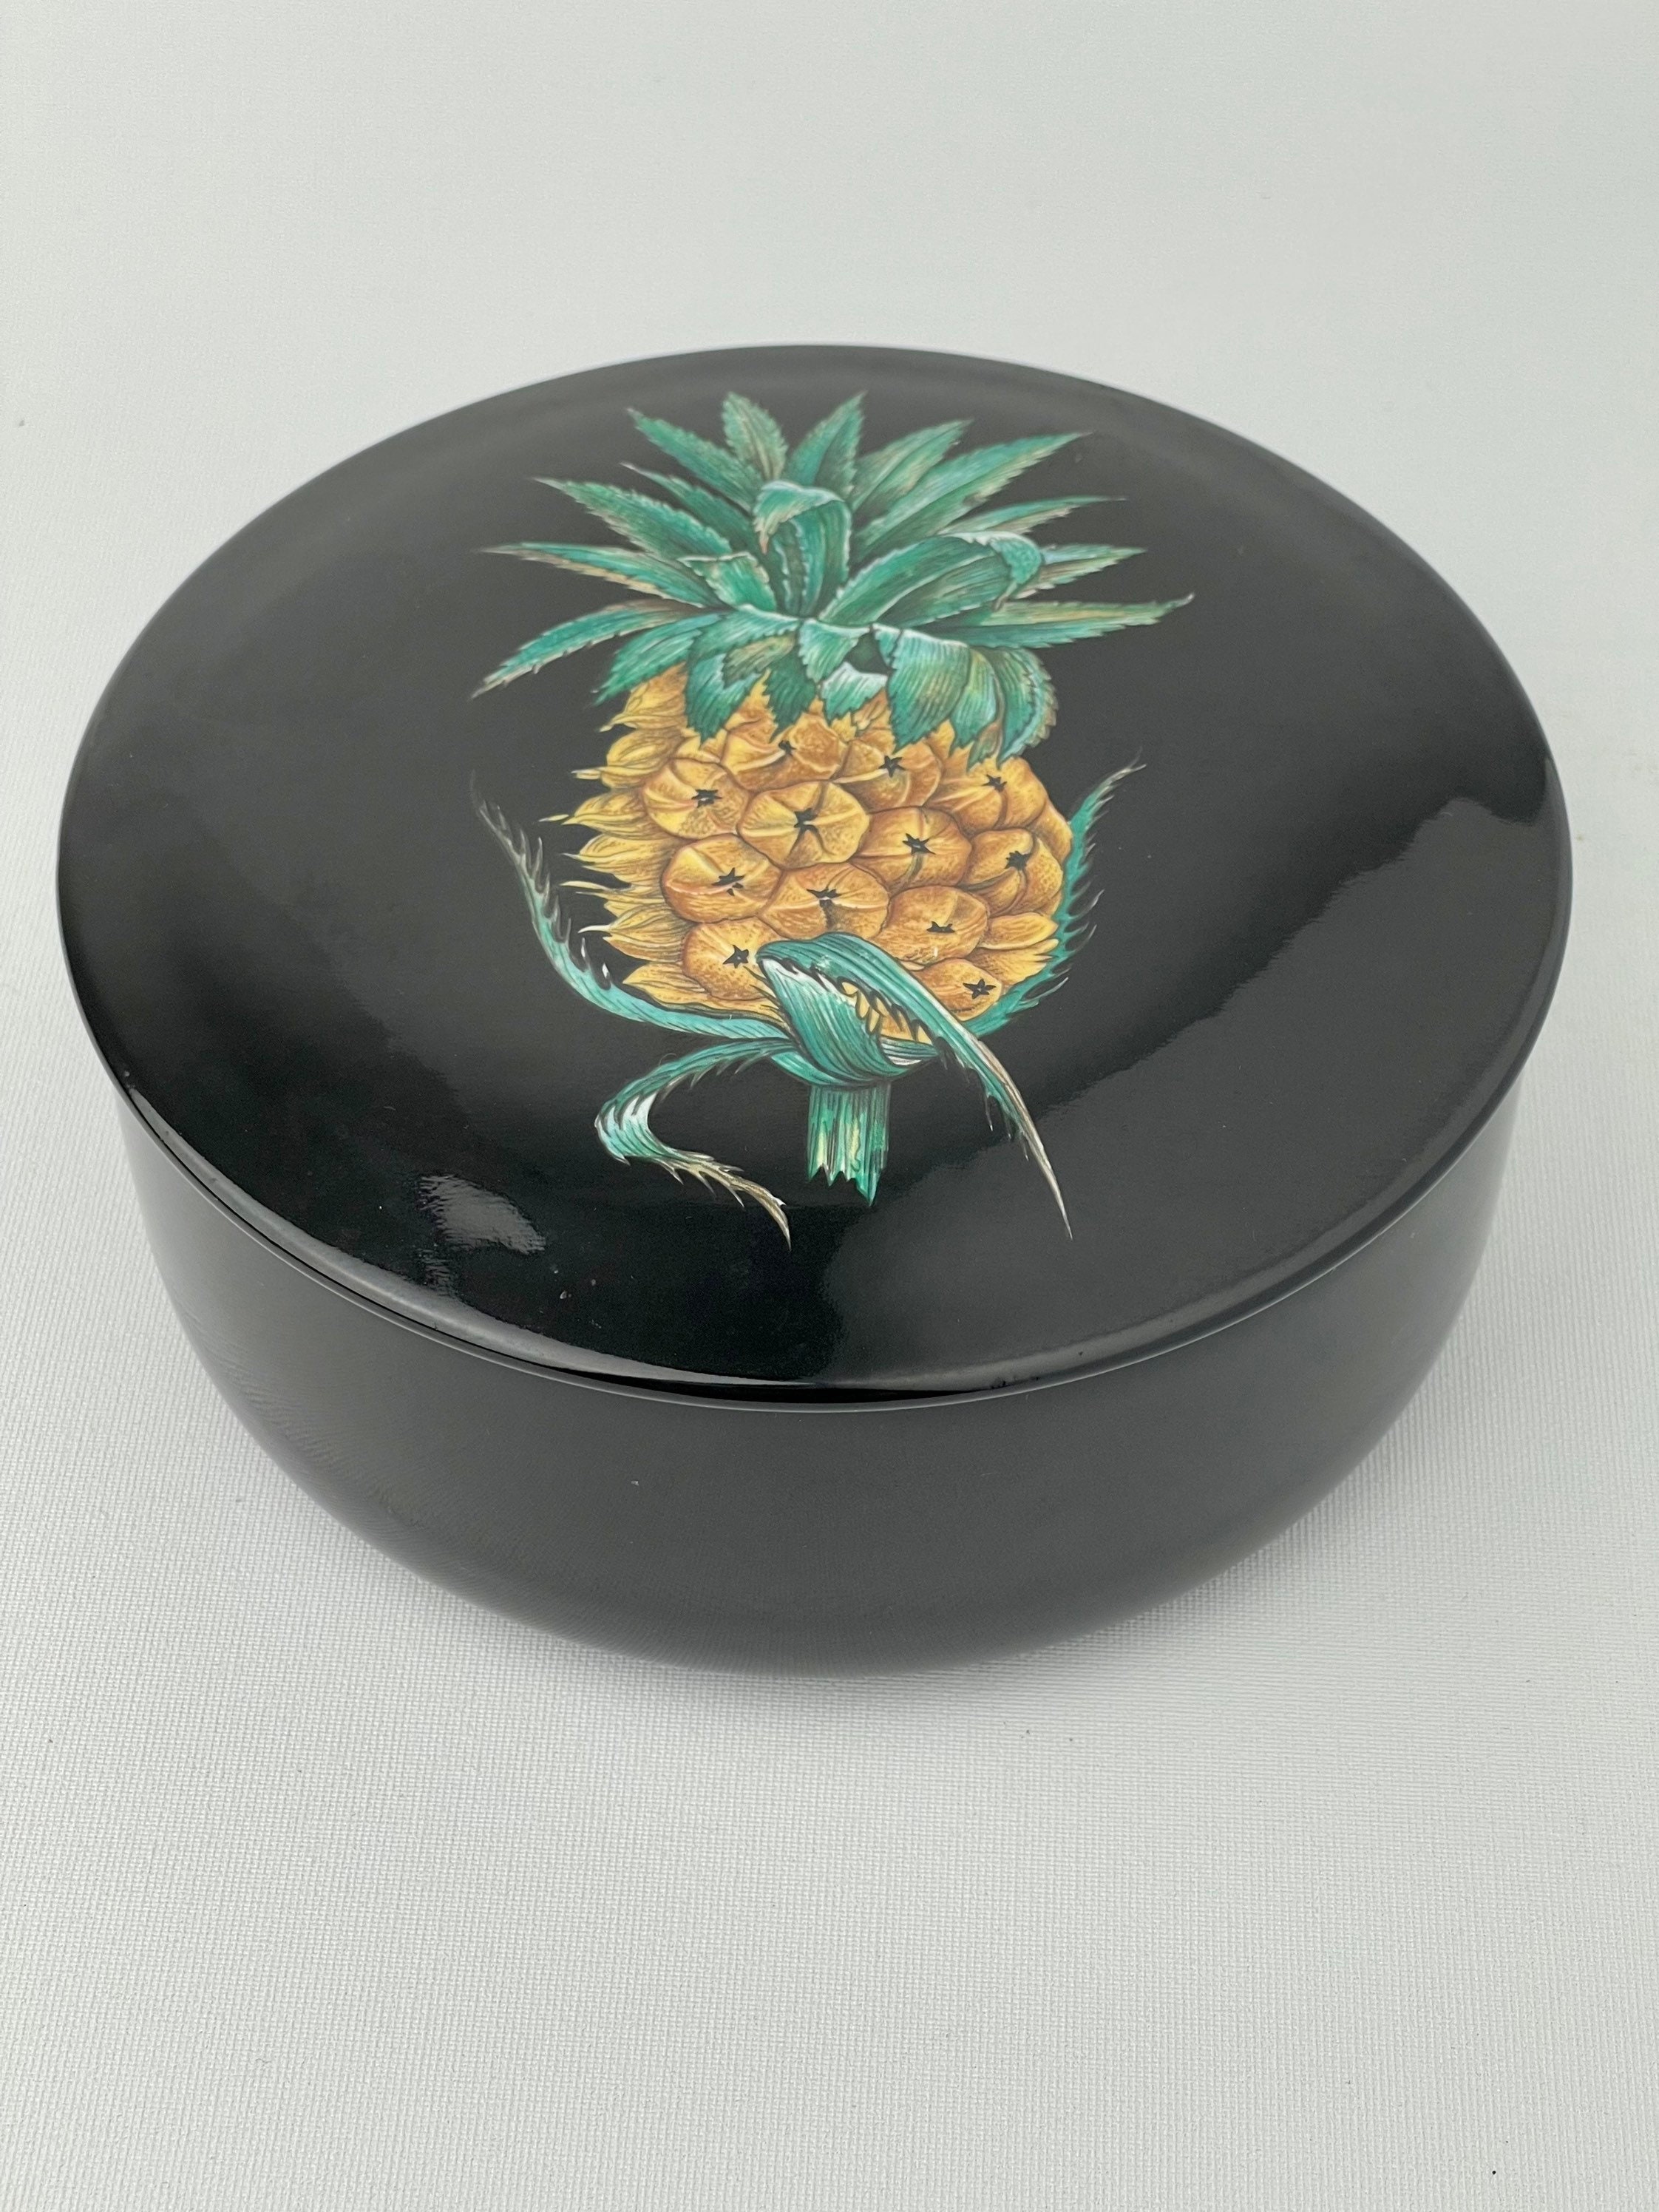 candy dish pineapple design Trinketbox Vintage Villeroy and Boch Pineapple Black Forest pineapple ceramic pineapple print